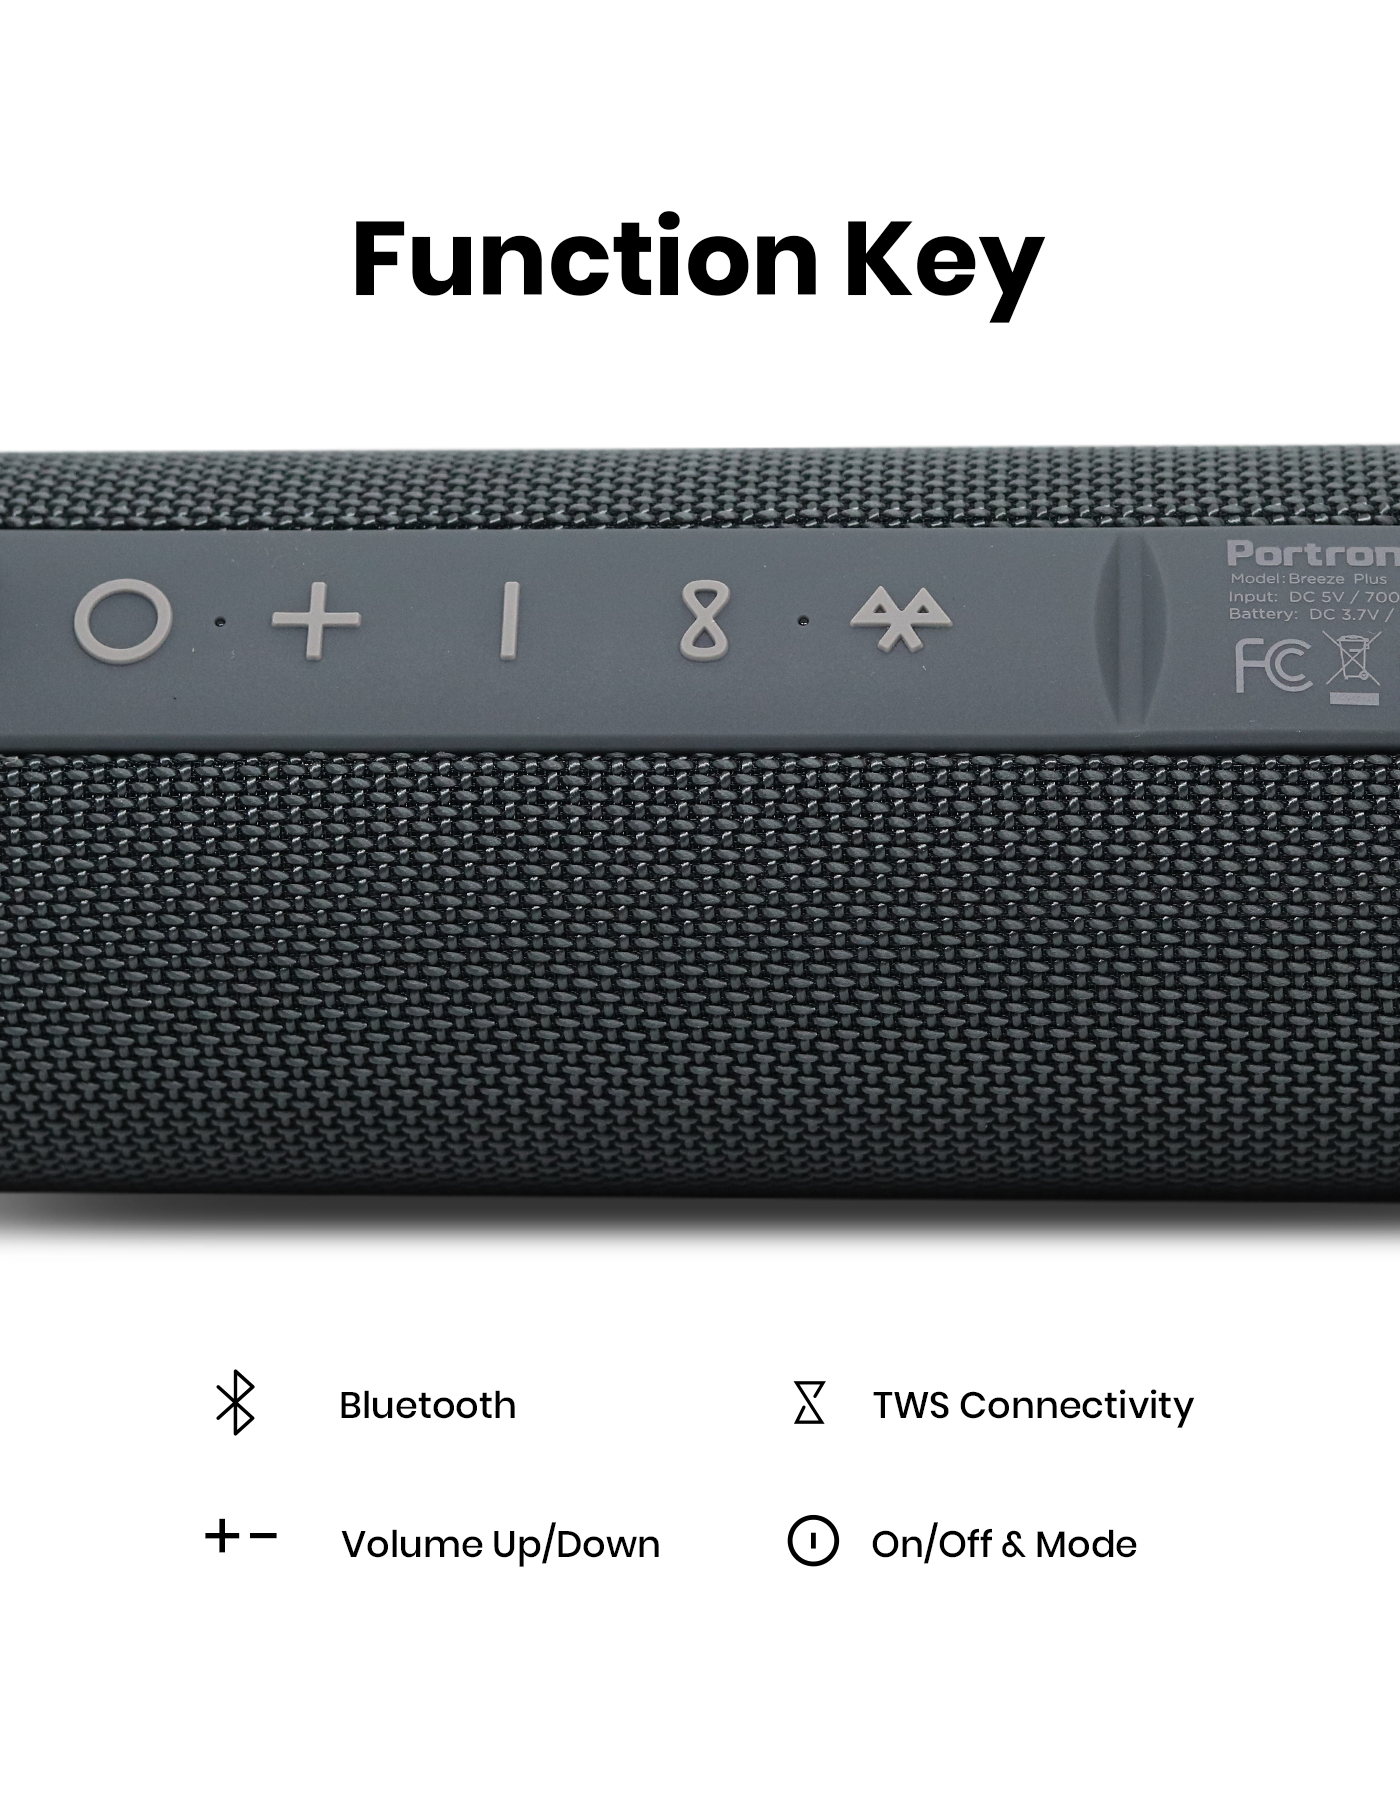 Portronics Breeze Plus True Portable Wireless speaker with functions on its body